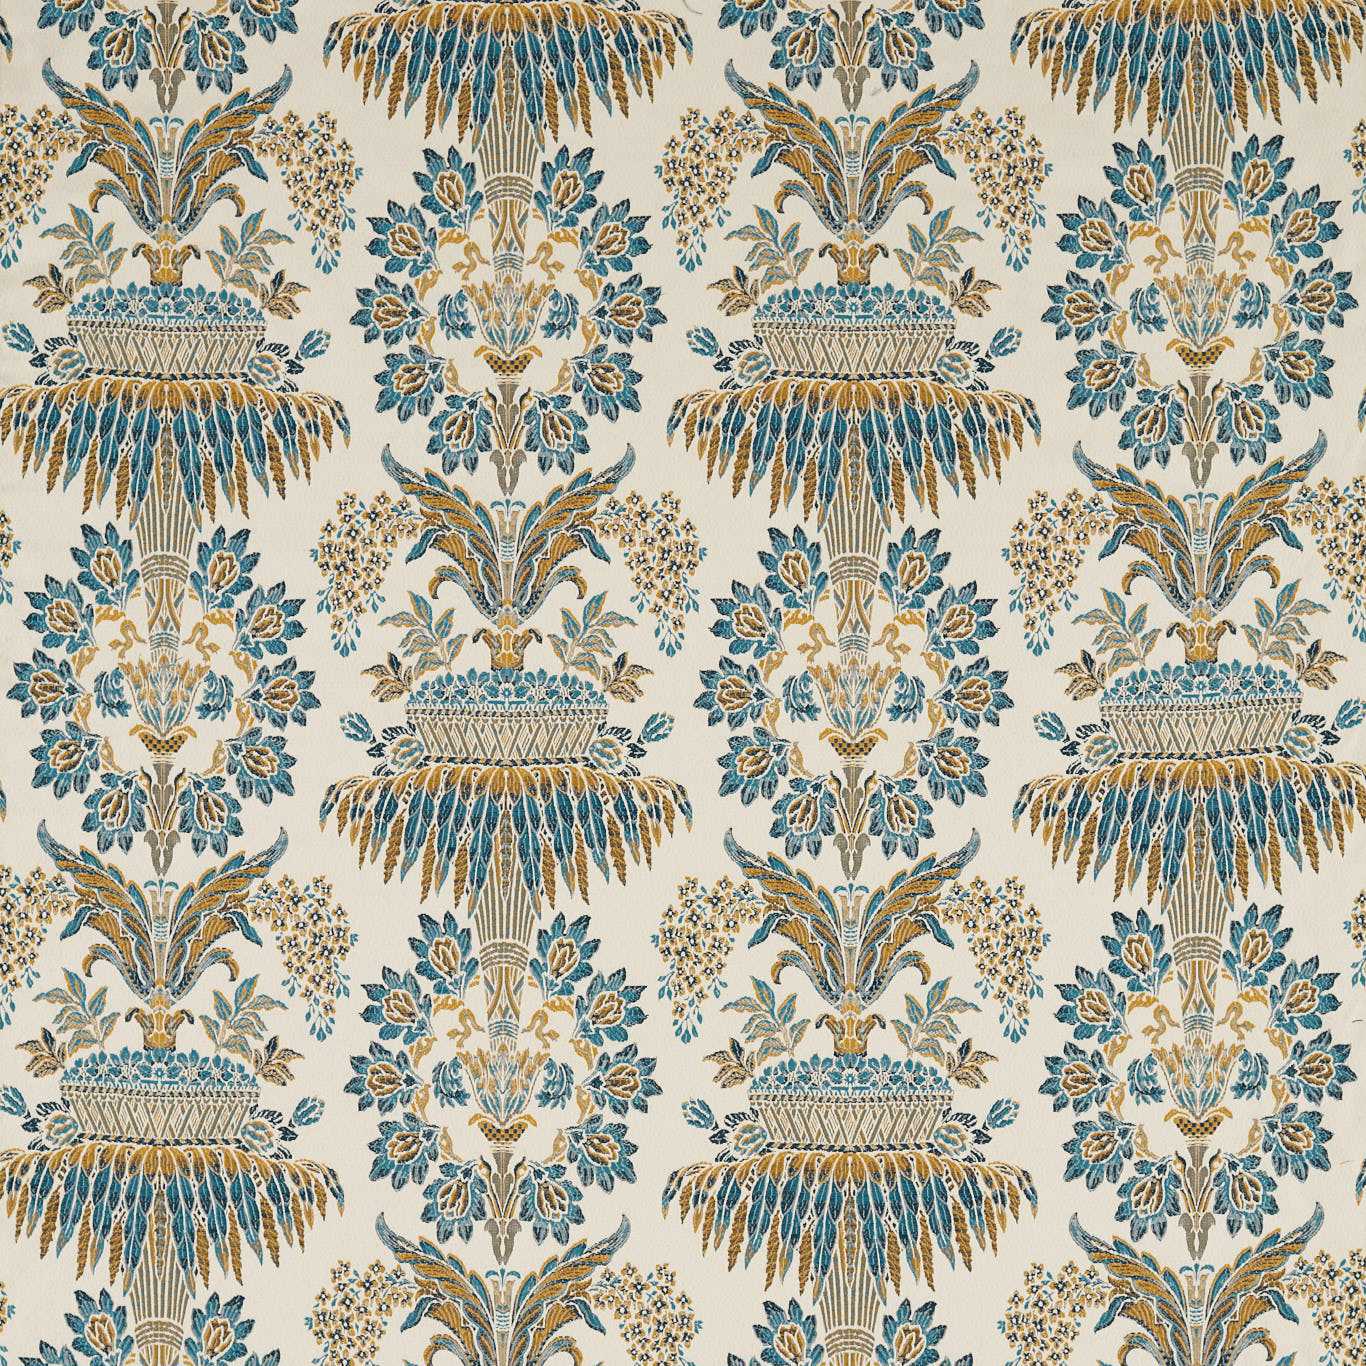 Long Gallery Brocade Teal/Gold Fabric by ZOF